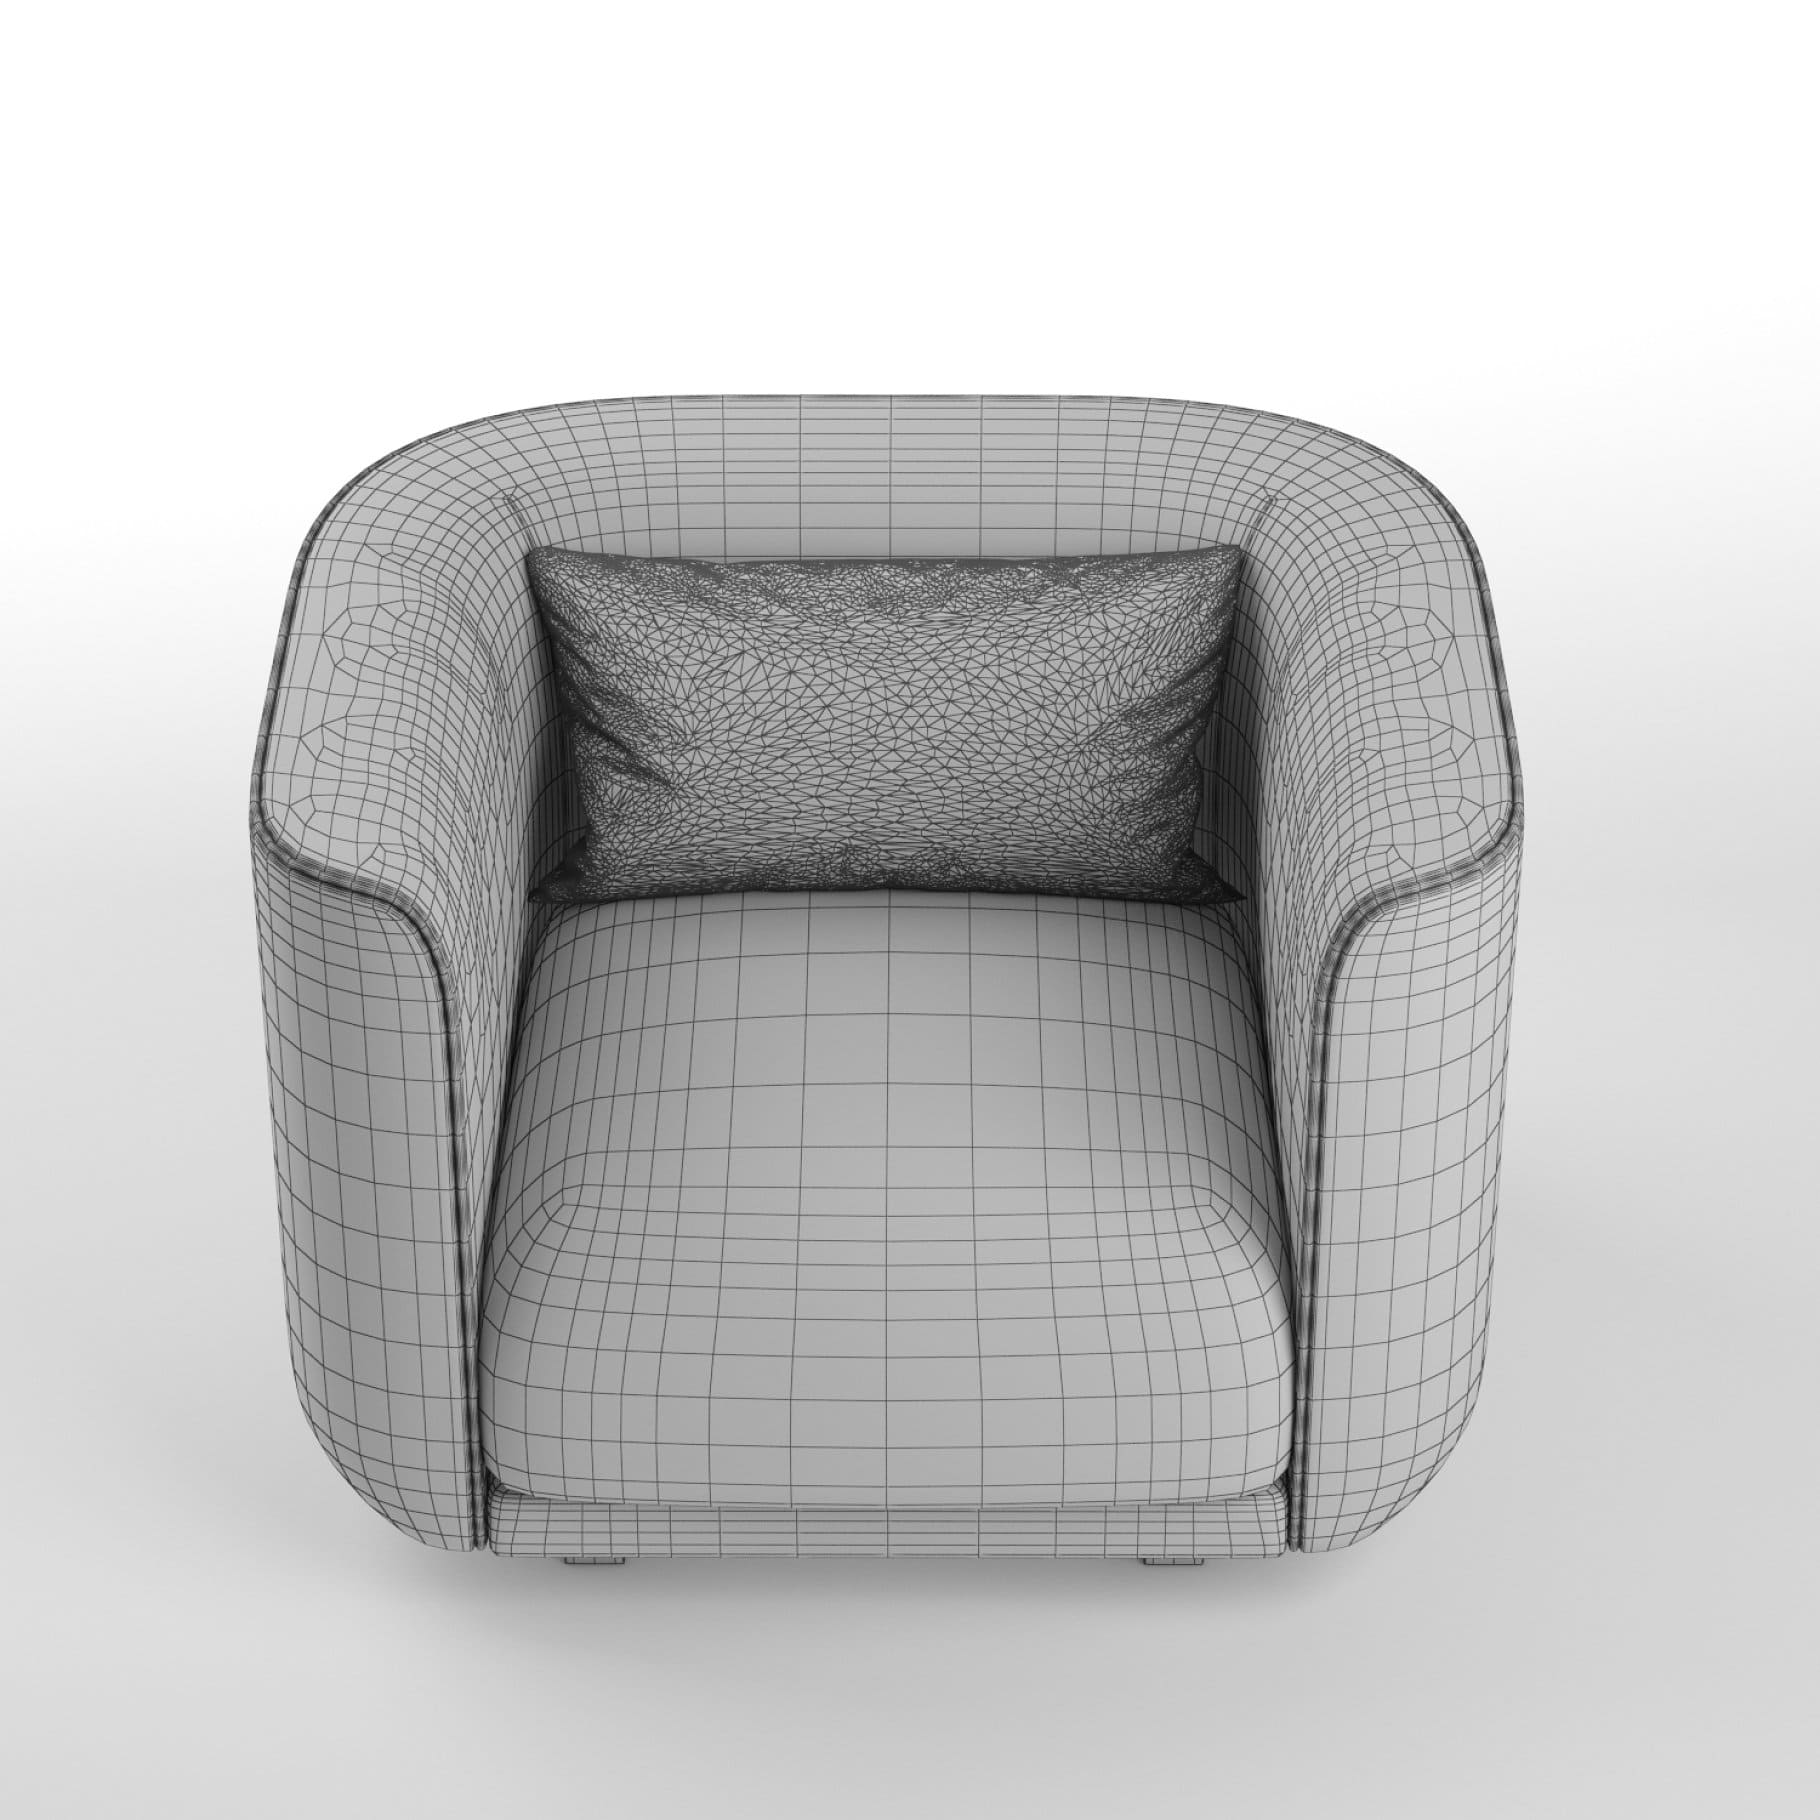 3D model of Fat Tulip Arm Chair with rectangular cushion.